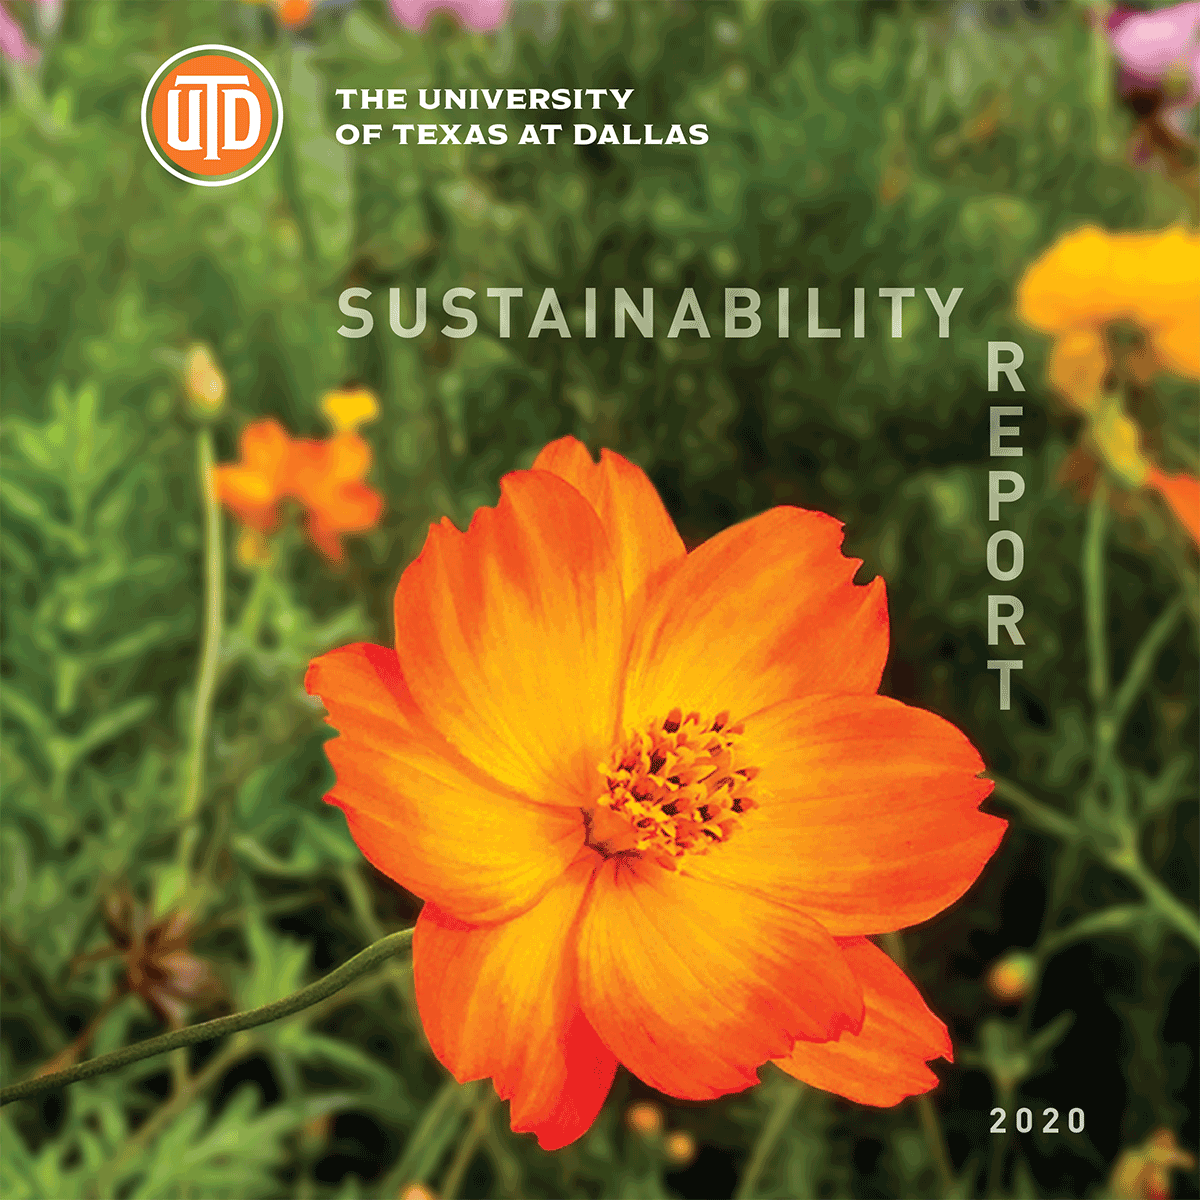 Download the 2020 Sustainability Report